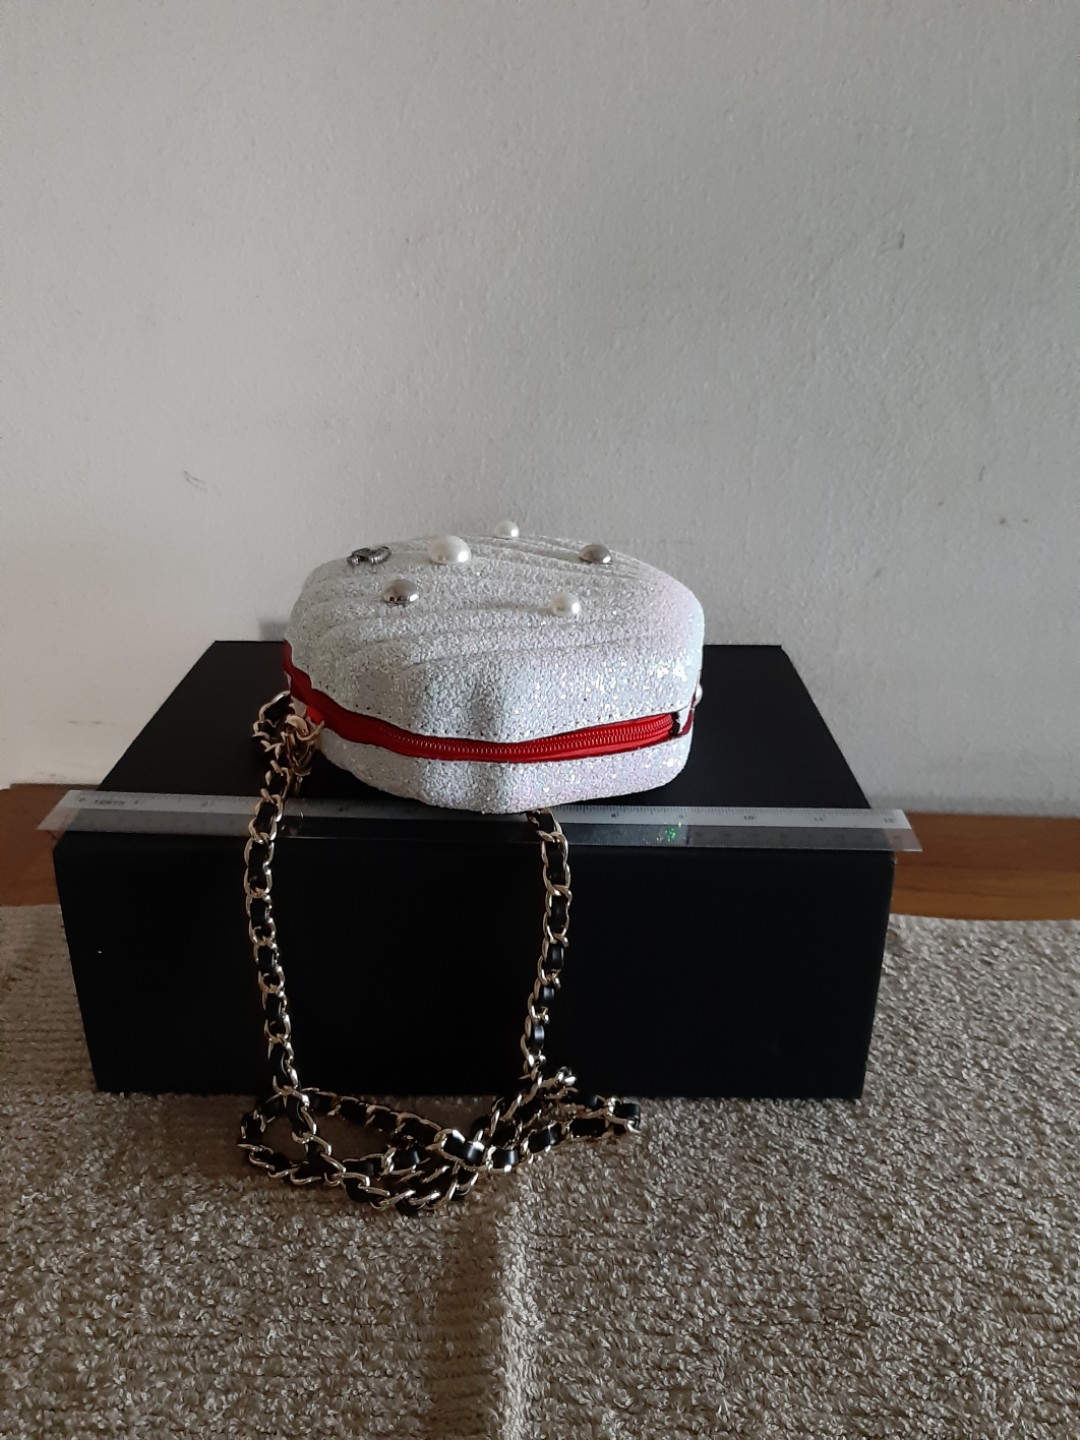 Rare Authentic Chanel VIP Gifts (Novelty Bag) - Extremely hard to